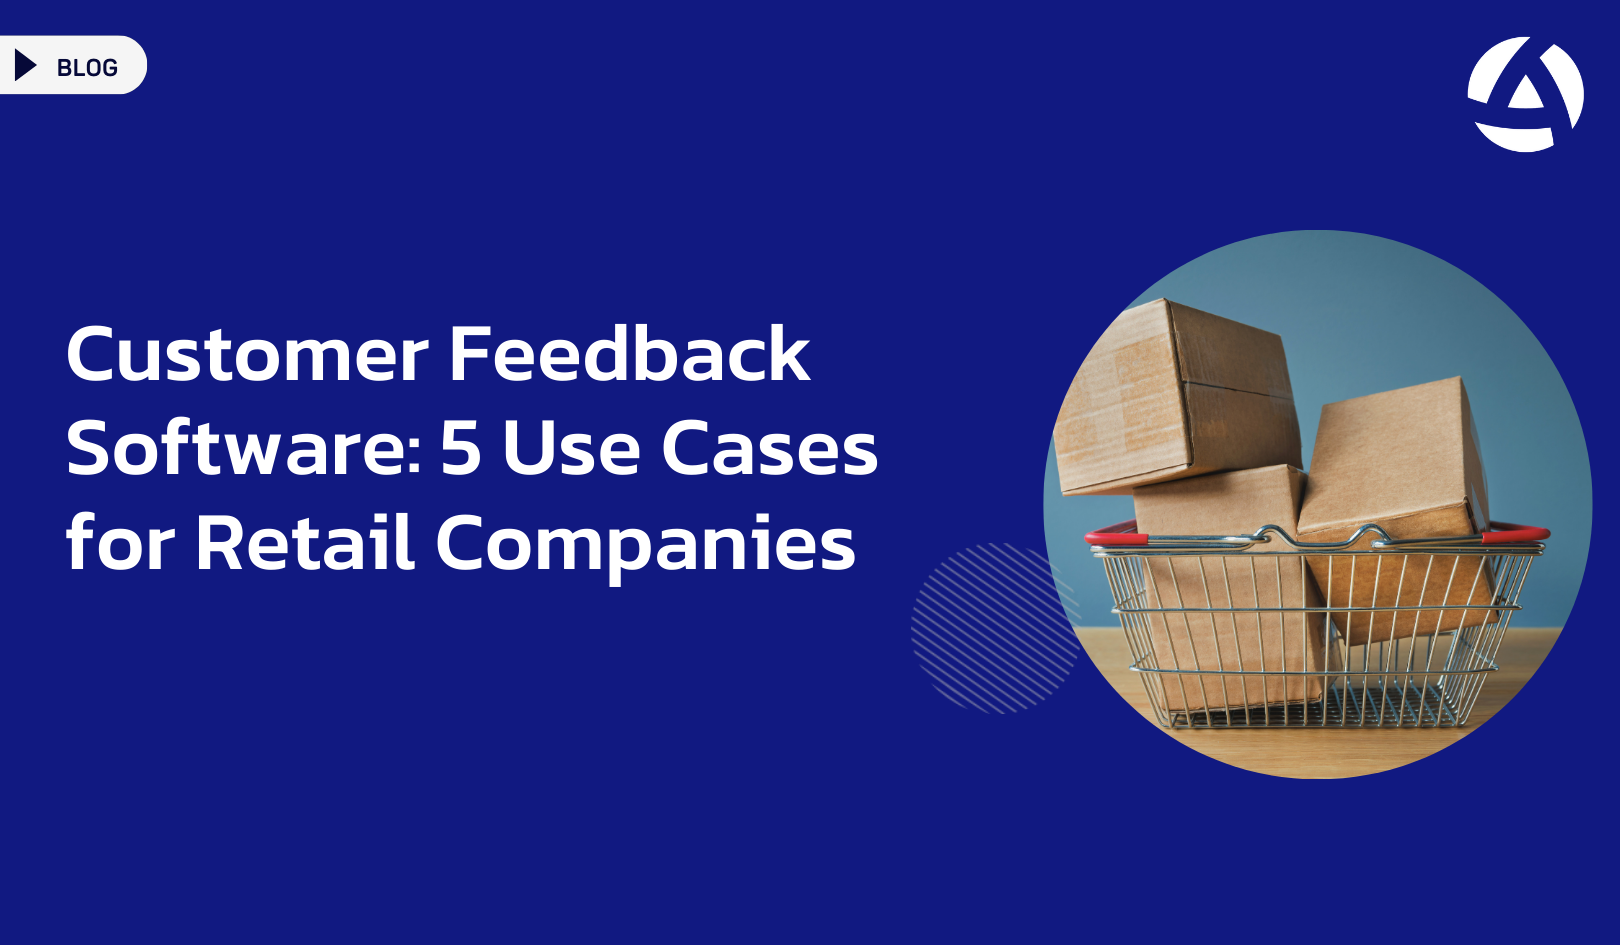 Customer Feedback Software 5 Use Cases for Retail Companies